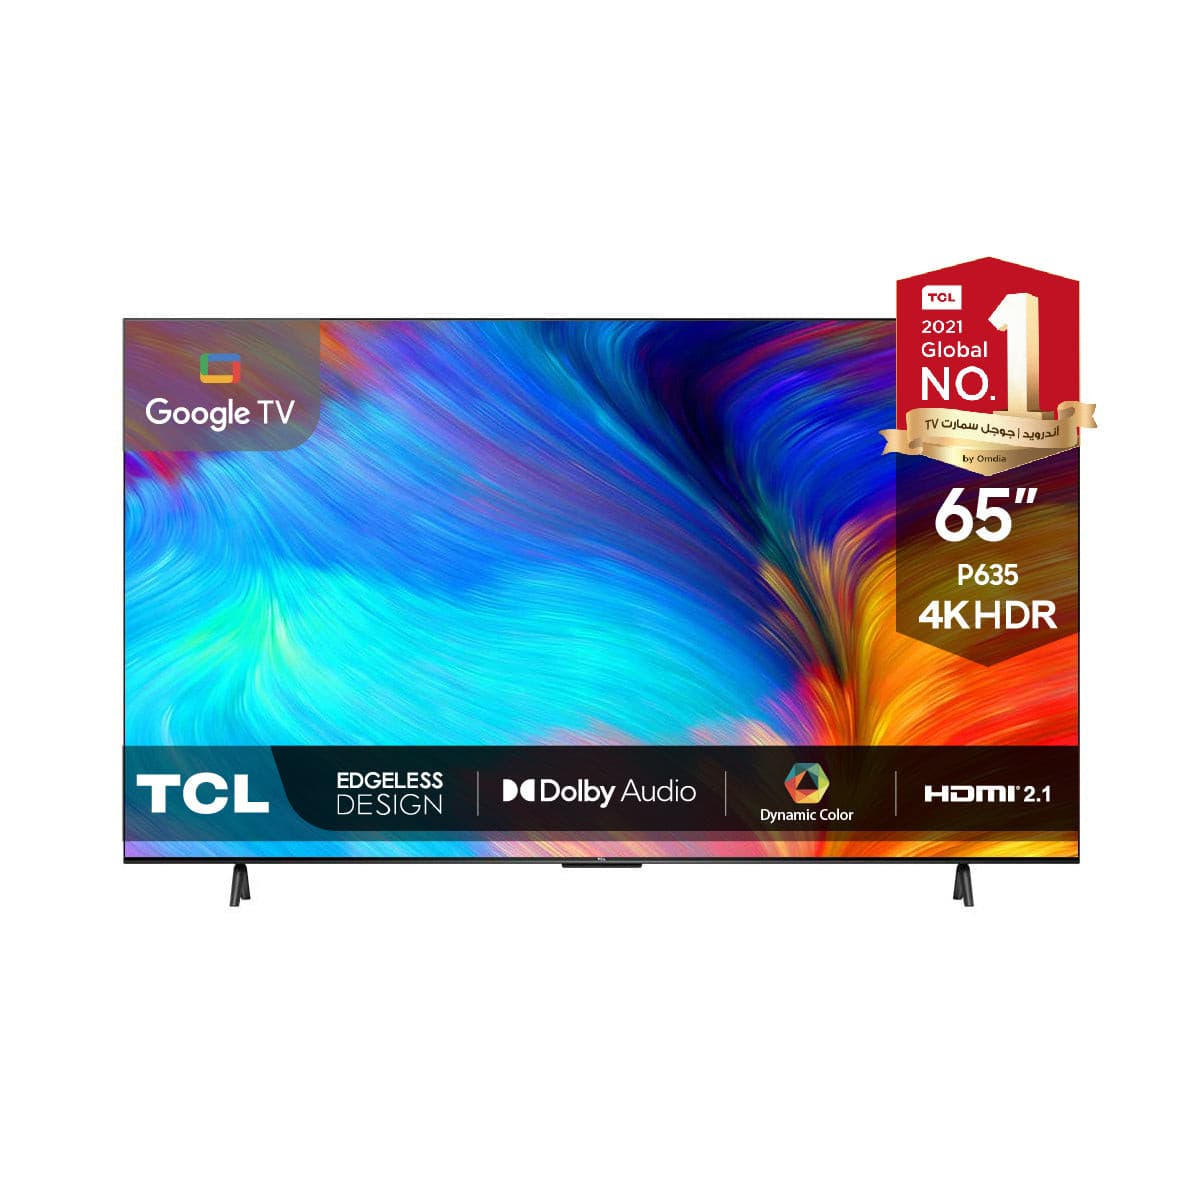 TCL 43C645 (43, 4K, HDR, QLED): Price, specs and best deals